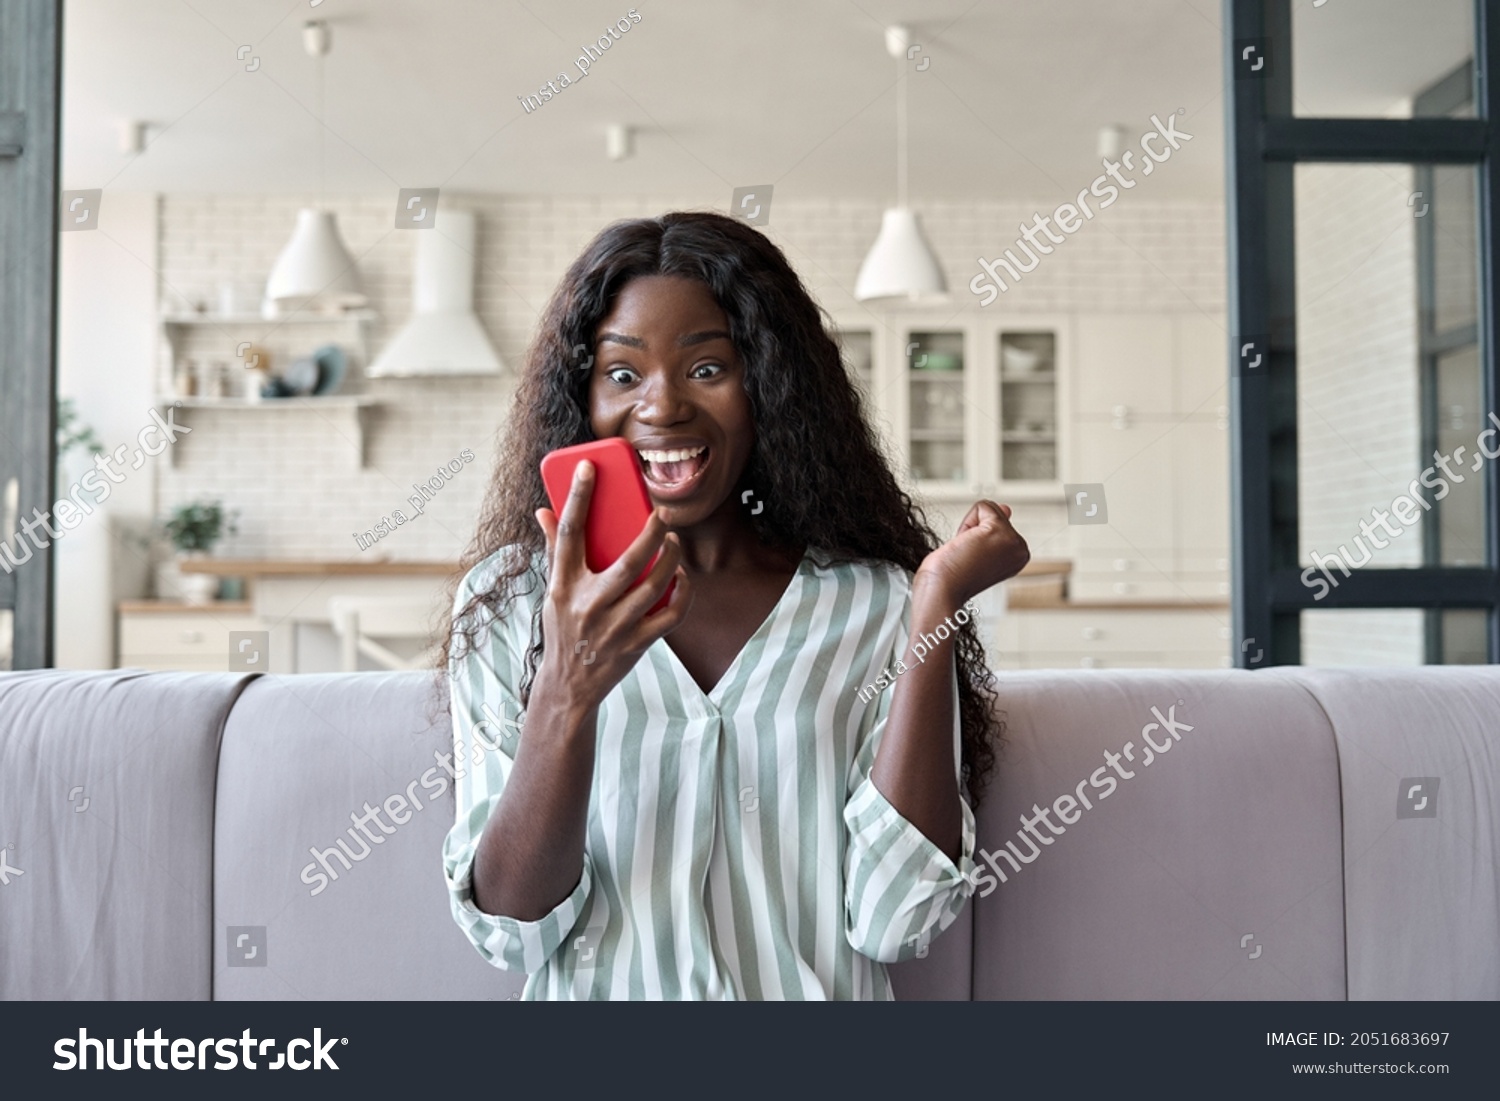 Young African girl at home reading message on mobile phone on unexpected news, happy client winning online shopping promo, gets prize in social media giveaway. Good luck big win concept. #2051683697